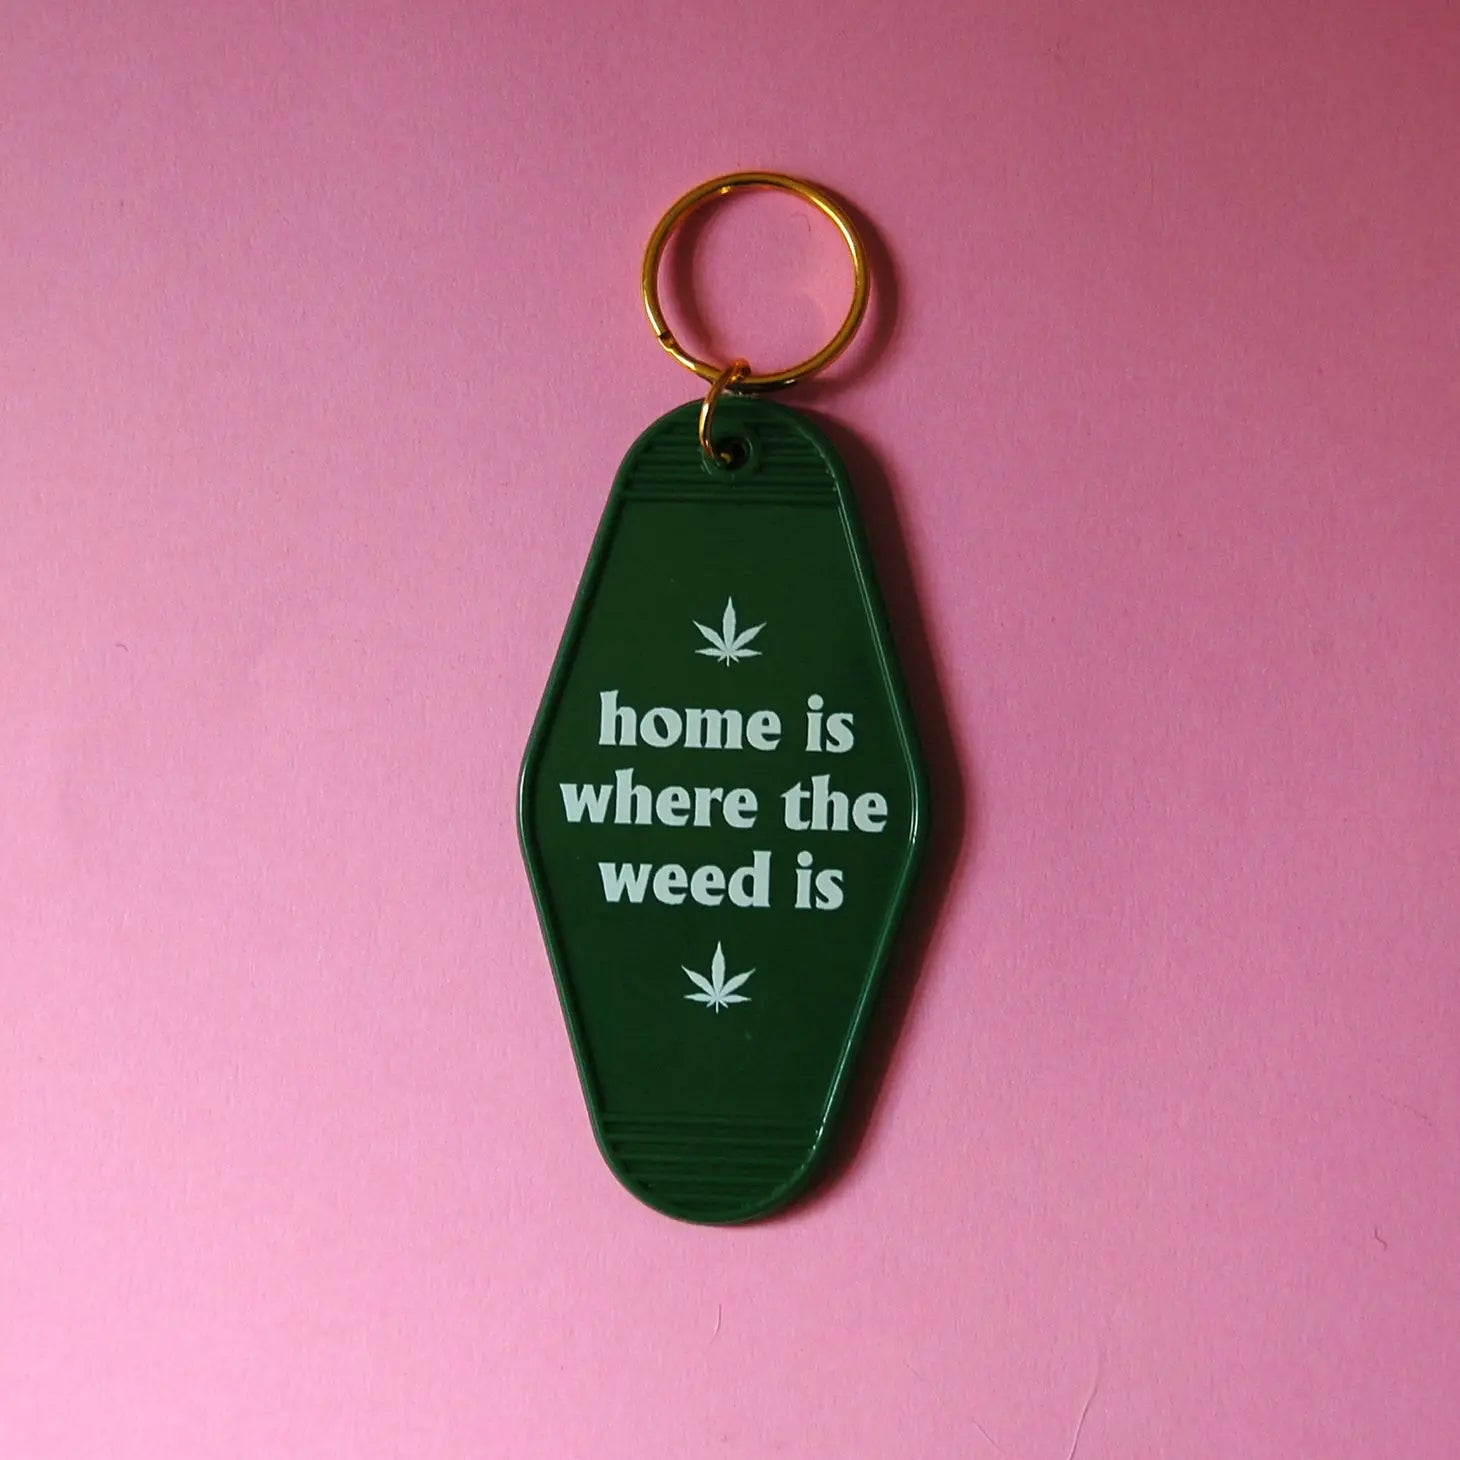 Home Is Where The Weed Is - Keychain